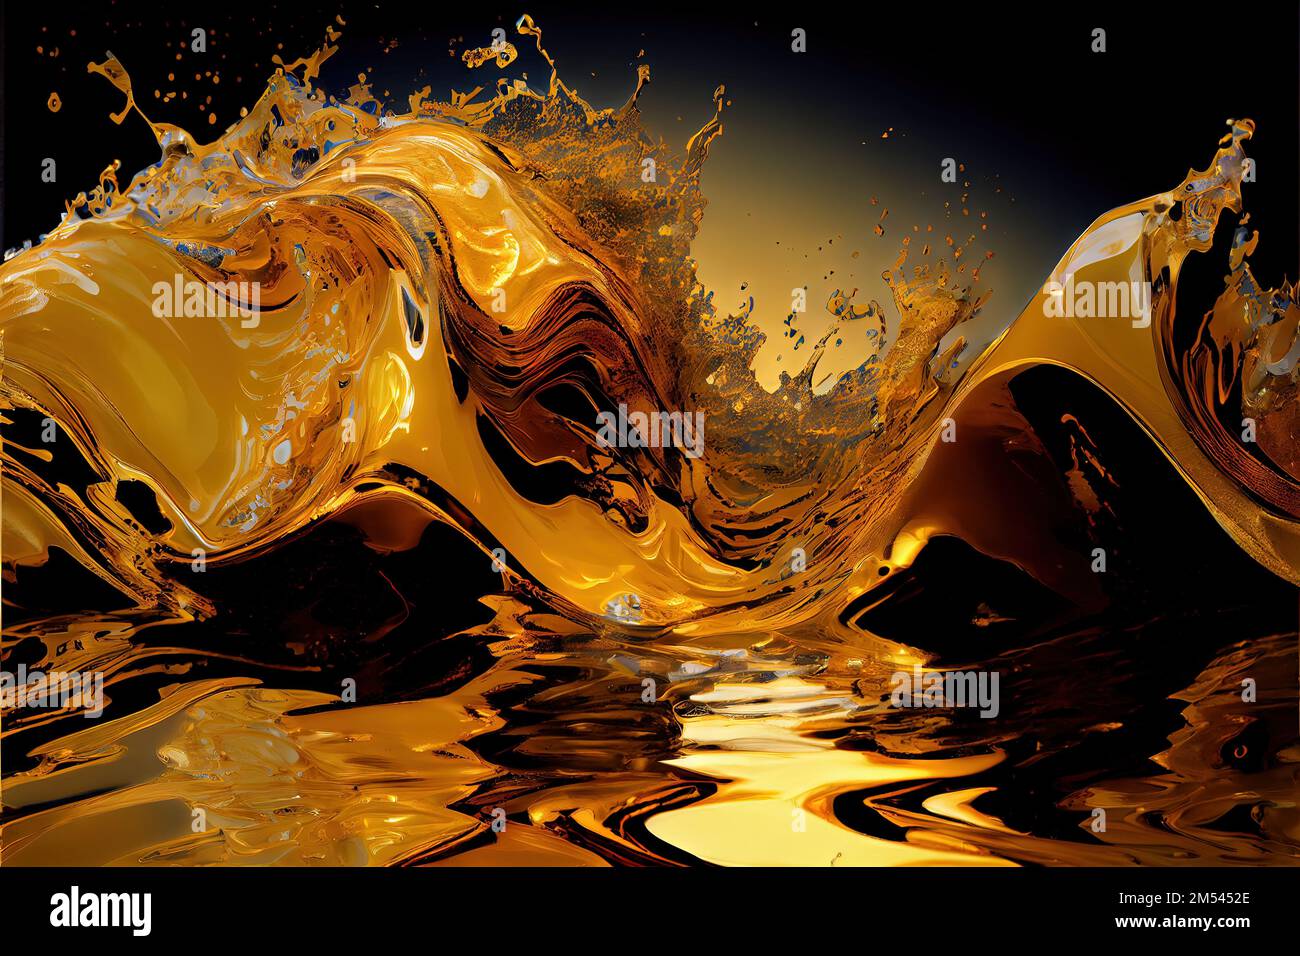 24K golden texture. Abstract concept art made for background wallpaper. glittering gold with metallic finish Stock Photo